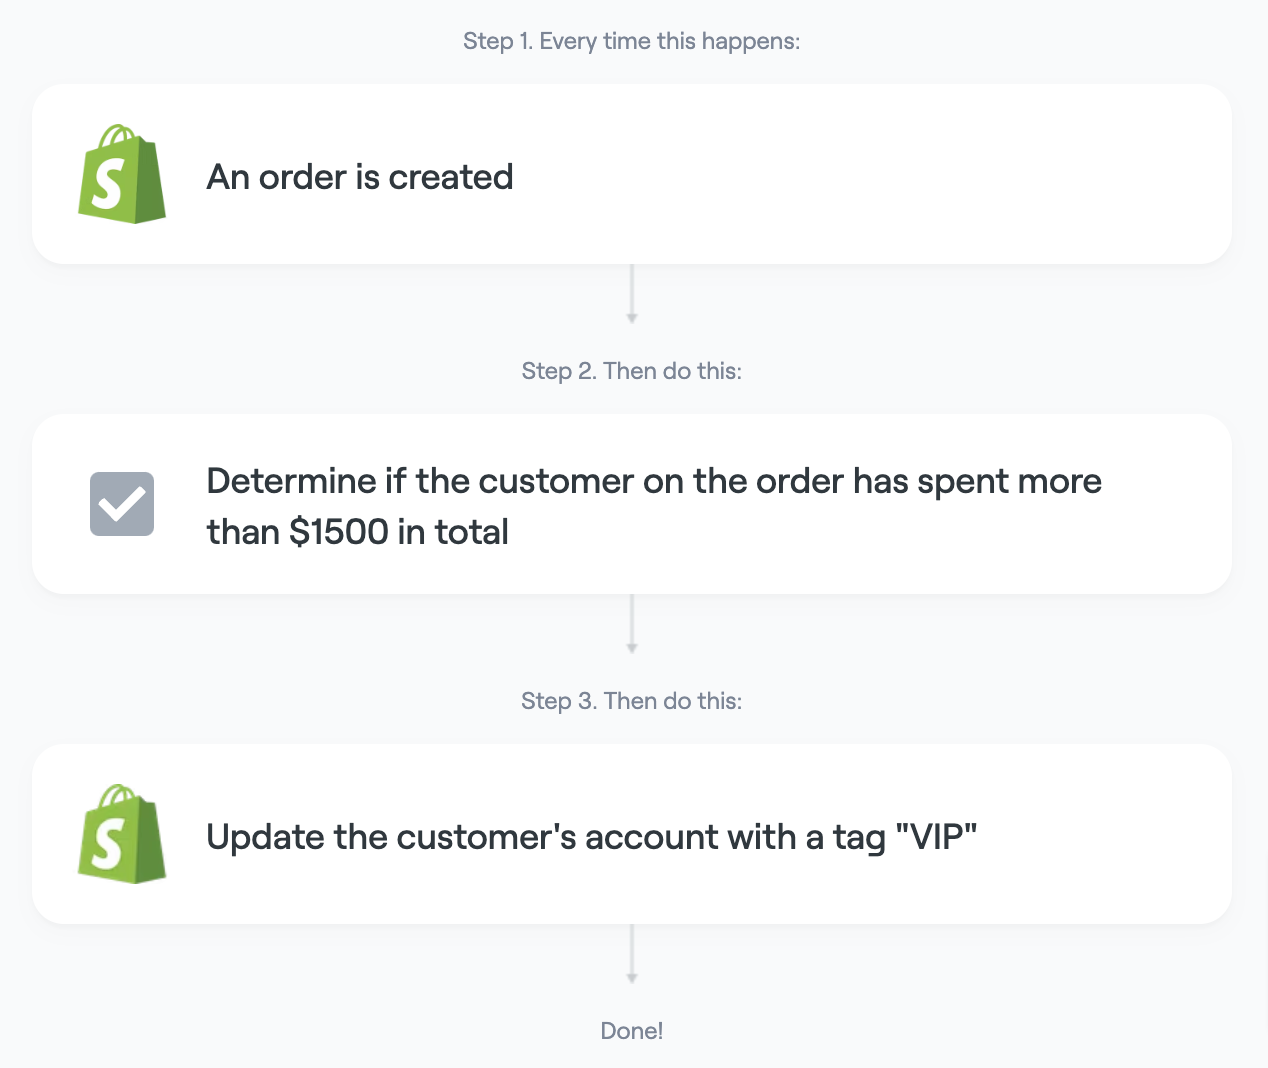 Tag customers when they reach a lifetime spending milestone